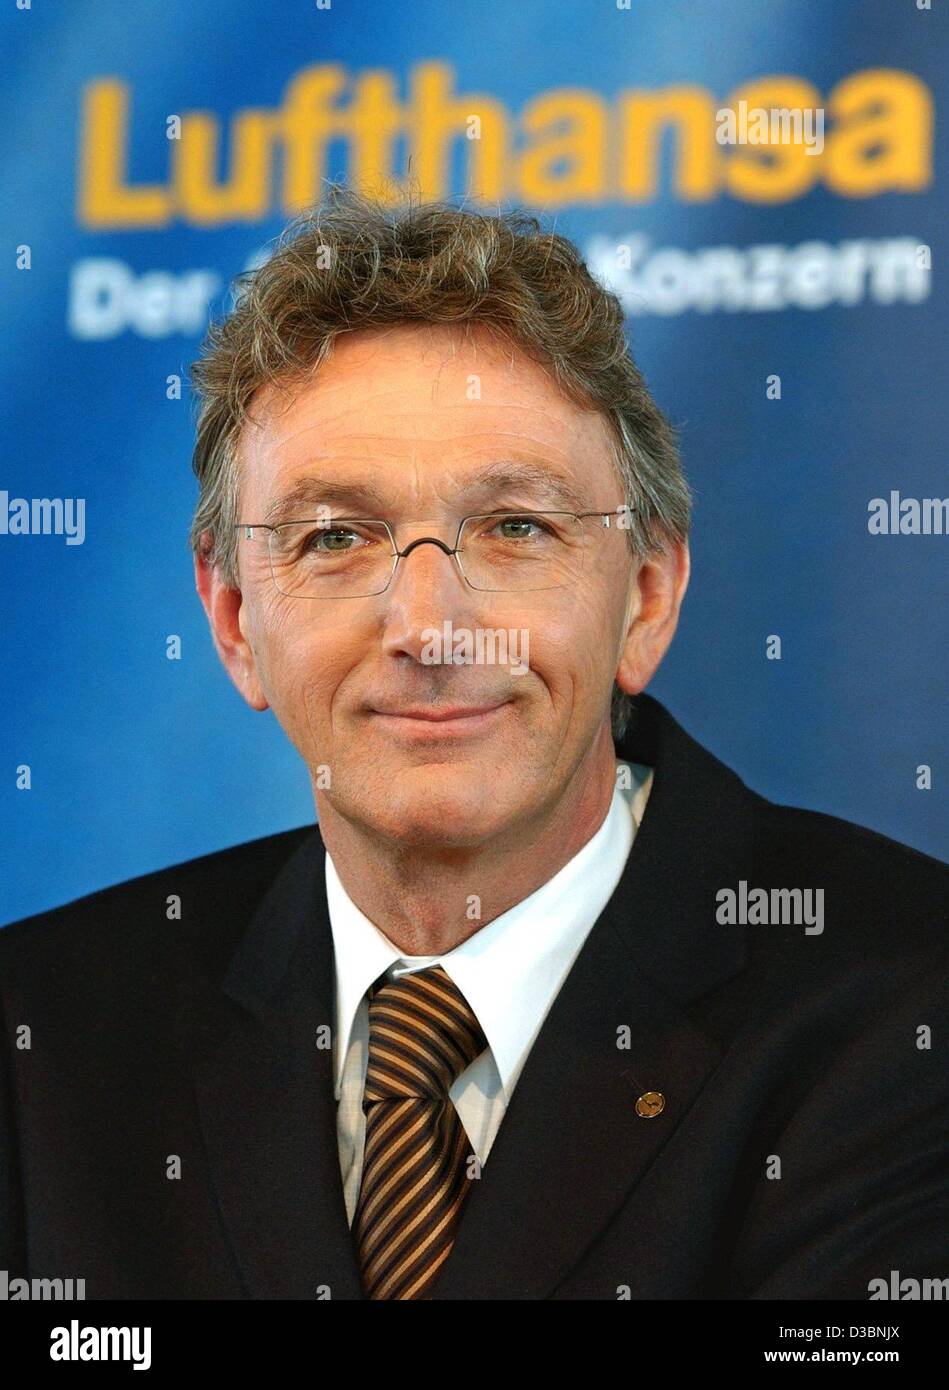 (dpa) - Wolfgang Mayrhuber, designated CEO of Lufthansa AG, pictured during a press conference of the Lufthansa airlines in Munich, Germany, 20 March 2003. After the difficult year 2001, Lufthansa was back in the black in 2002. According to own statistics, Lufthansa made a profit of 717 million Euro Stock Photo